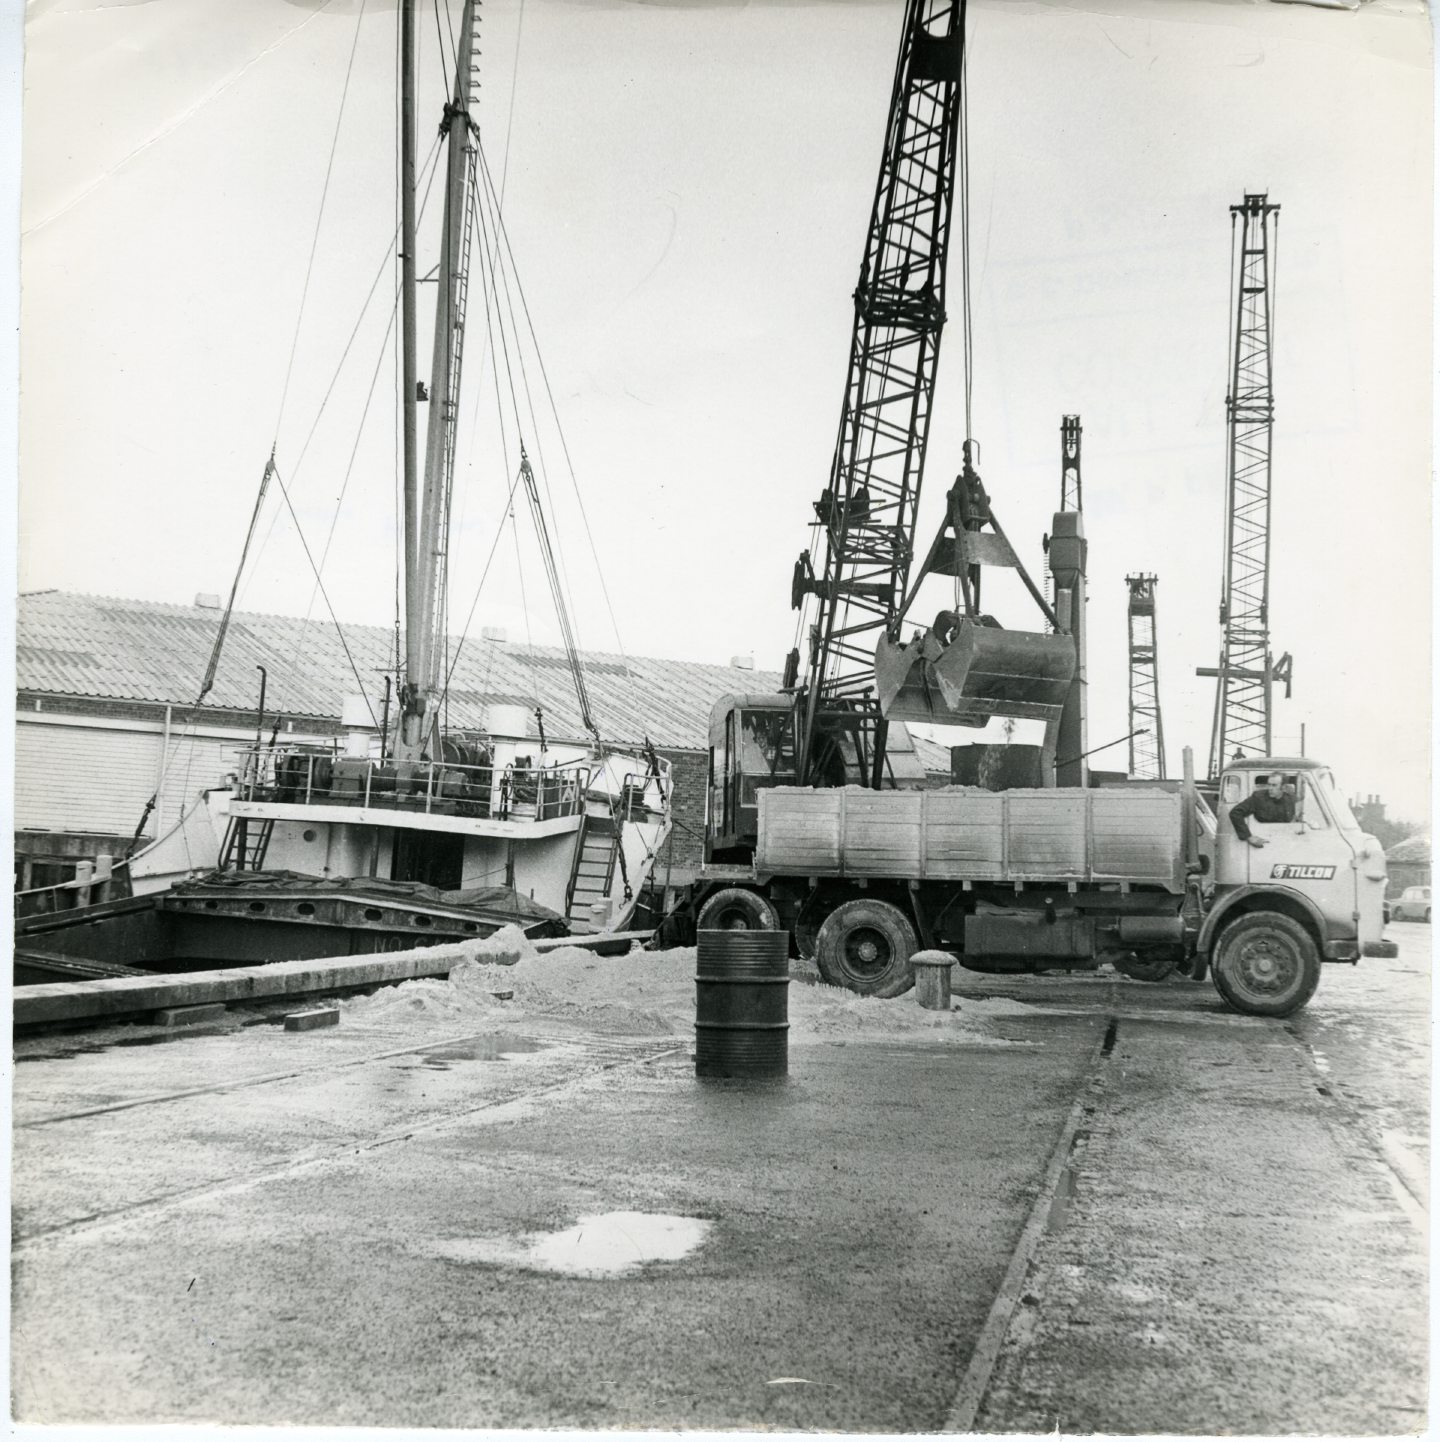 Work goes on at the harbour in 1971. Image: DC Thomson.